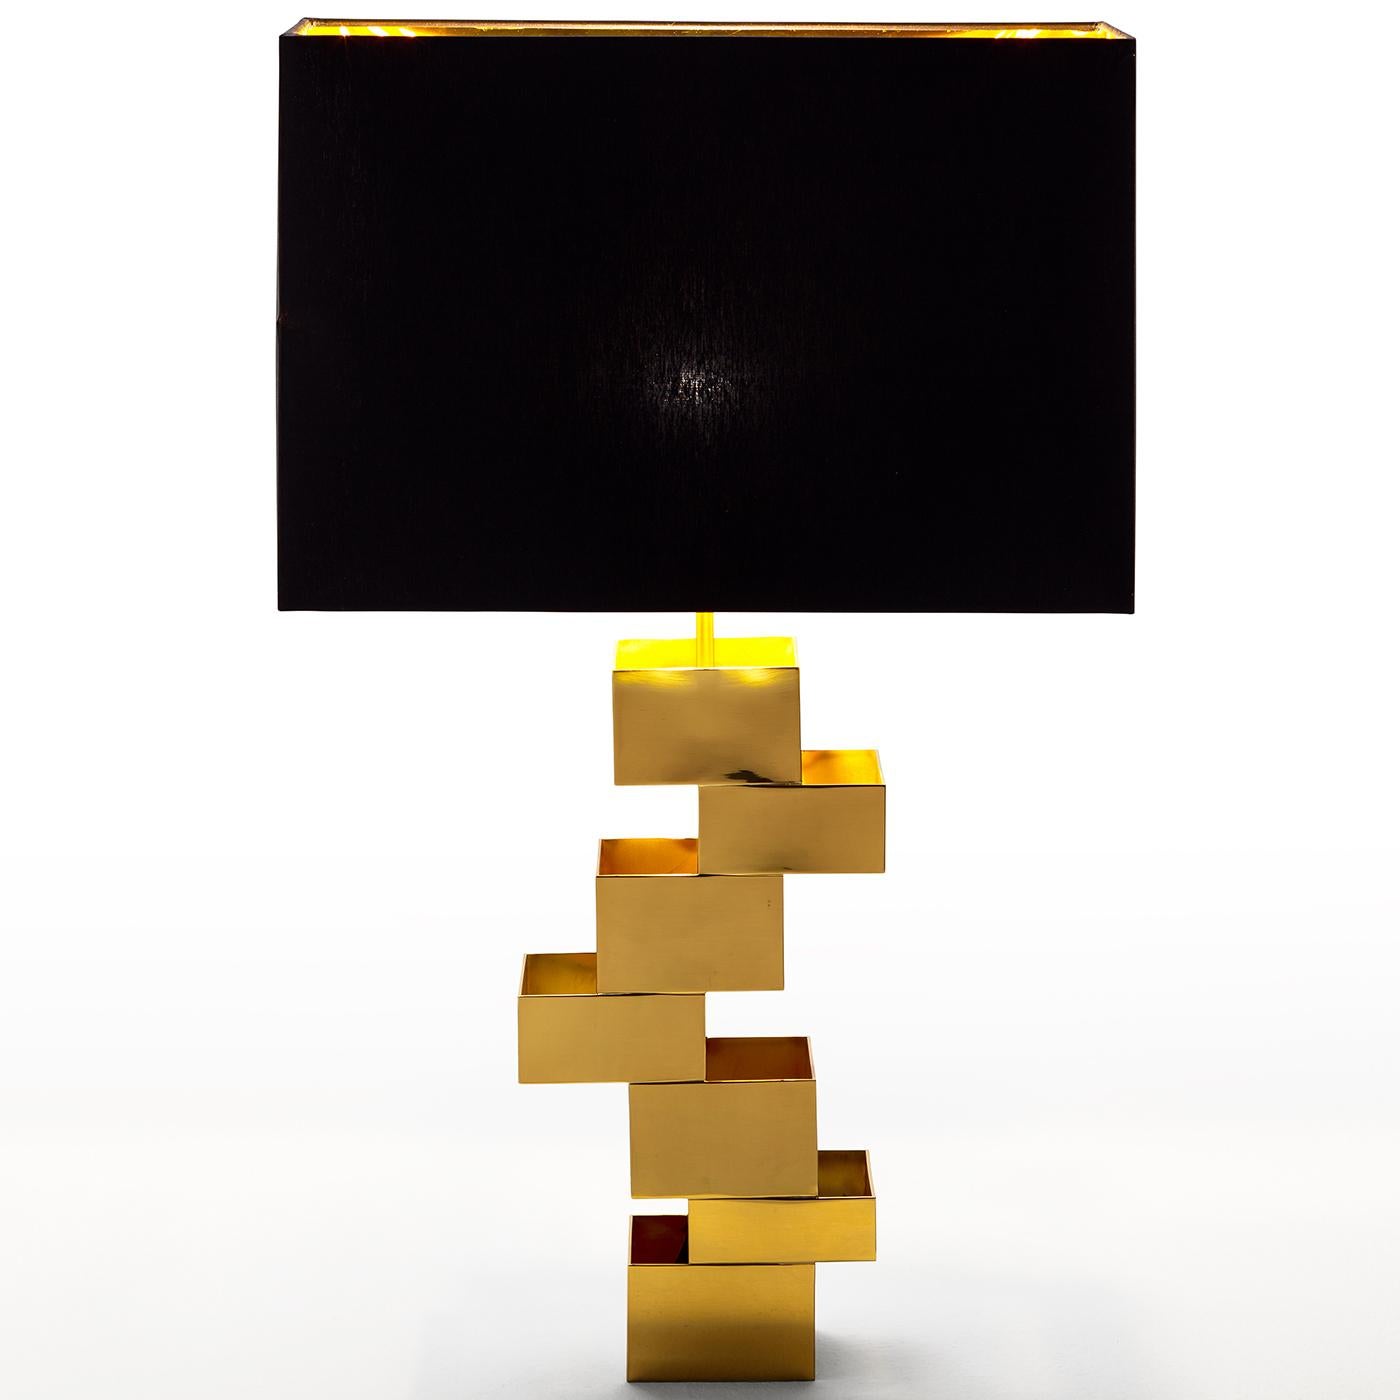 A mesmerizing interplay of balance, this table lamp is a sculptural work of art. Its striking design features a rectangular black lampshade that will emit a diffused, golden light thanks to its luminous interior. The base boasts an ingenious